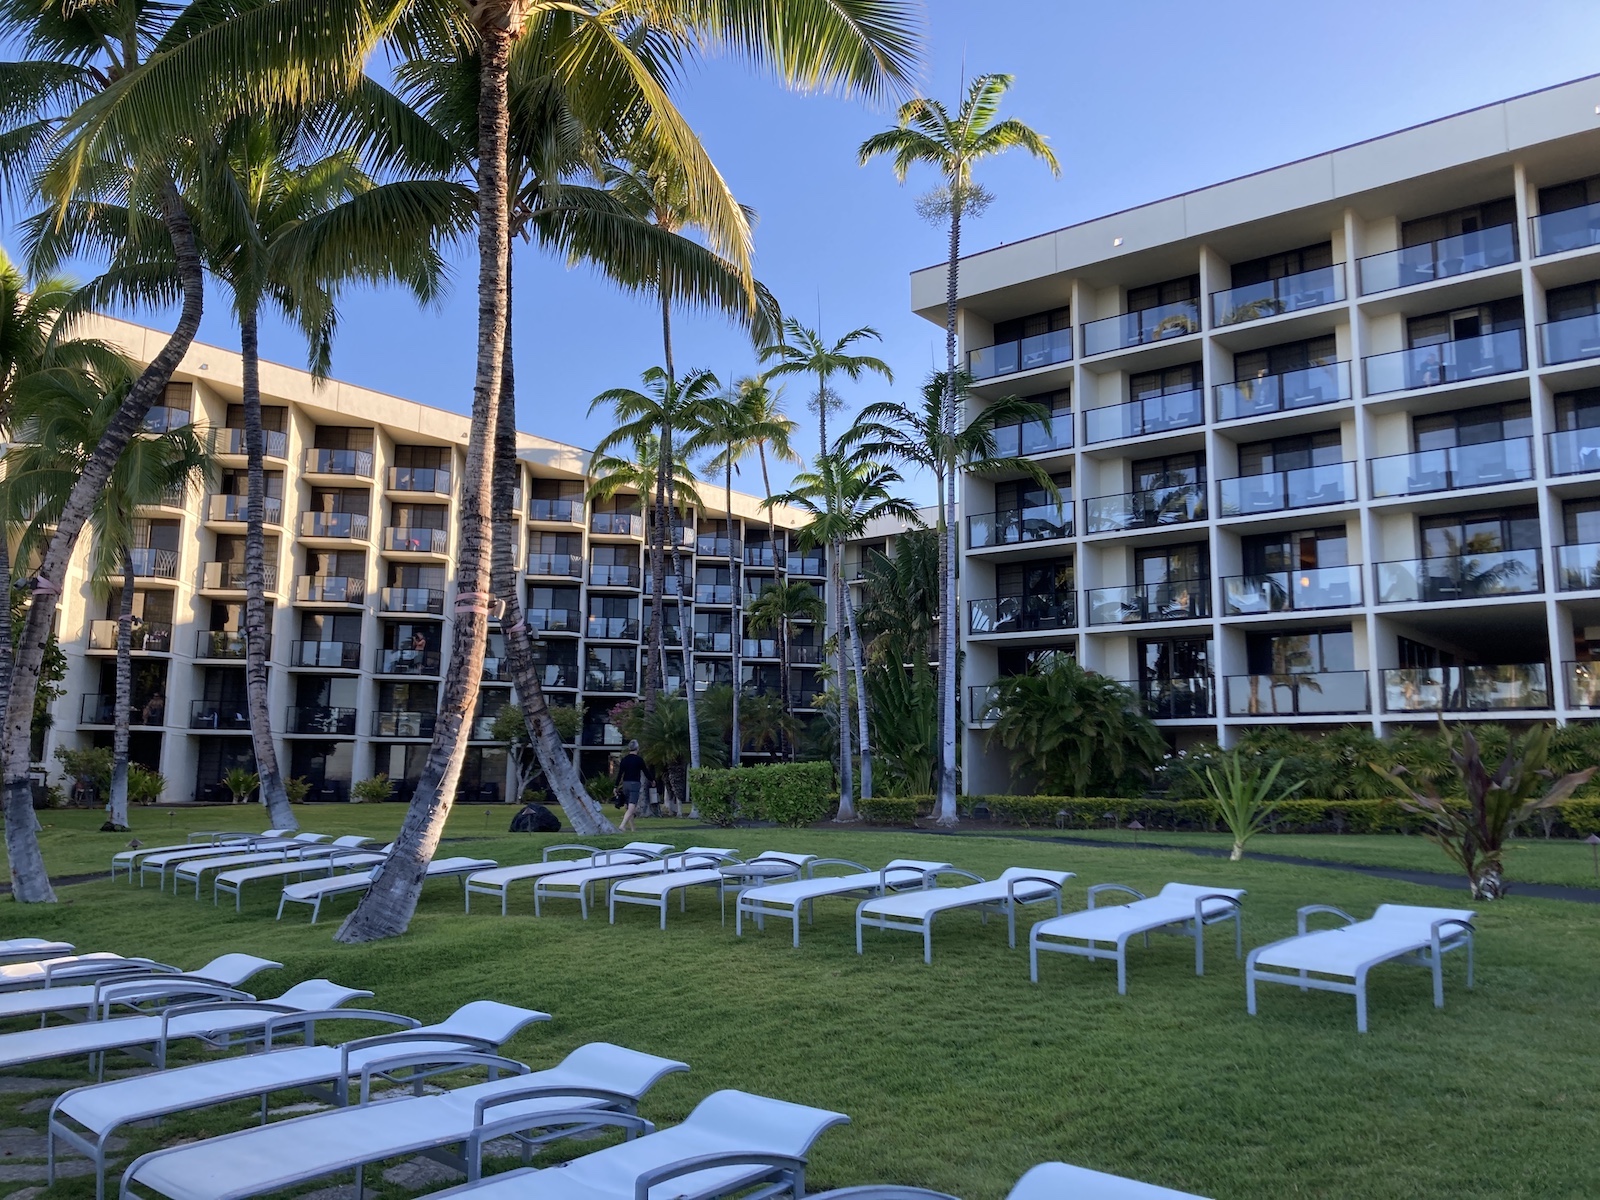 Empty lounge chairs sit in the grass in the foreground with the hotel building in the background